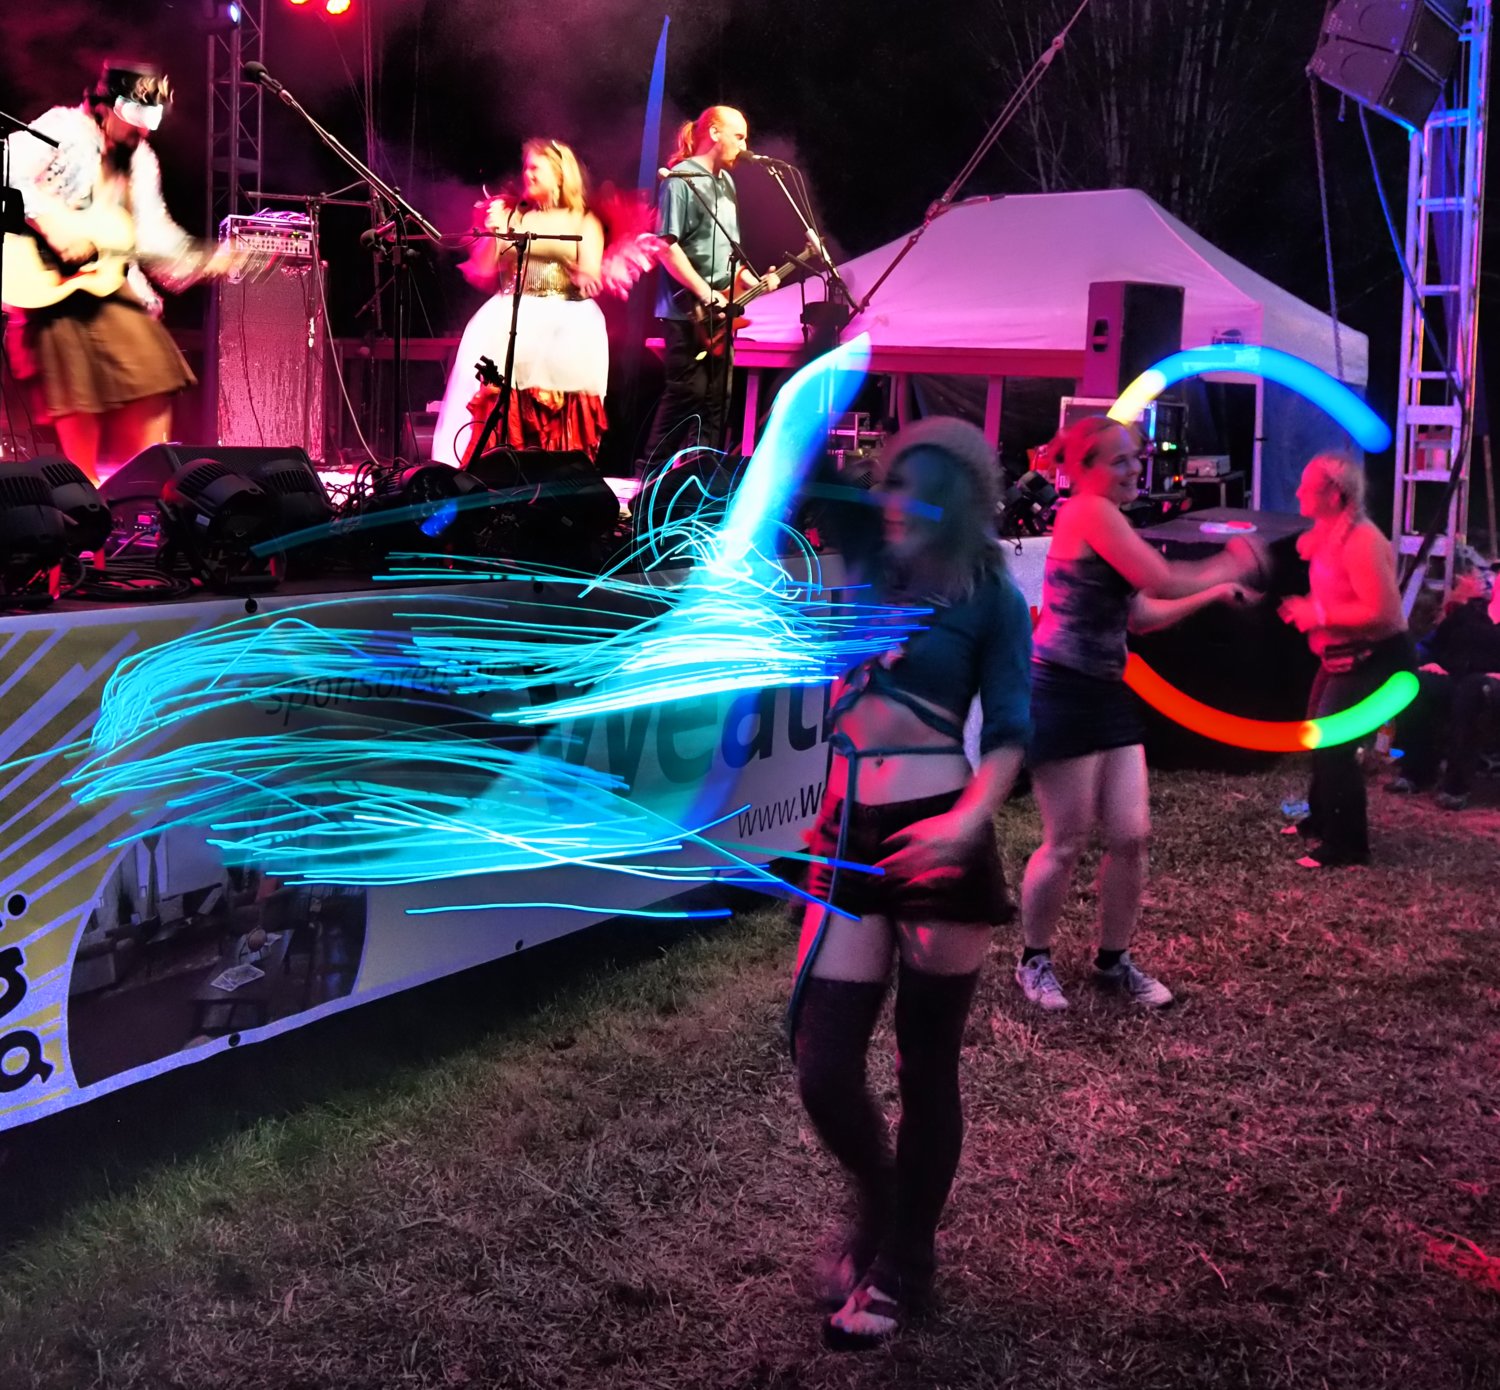 A fiber optic whip of light was one of the many kinds of entertaining toys attendees brought to the party.